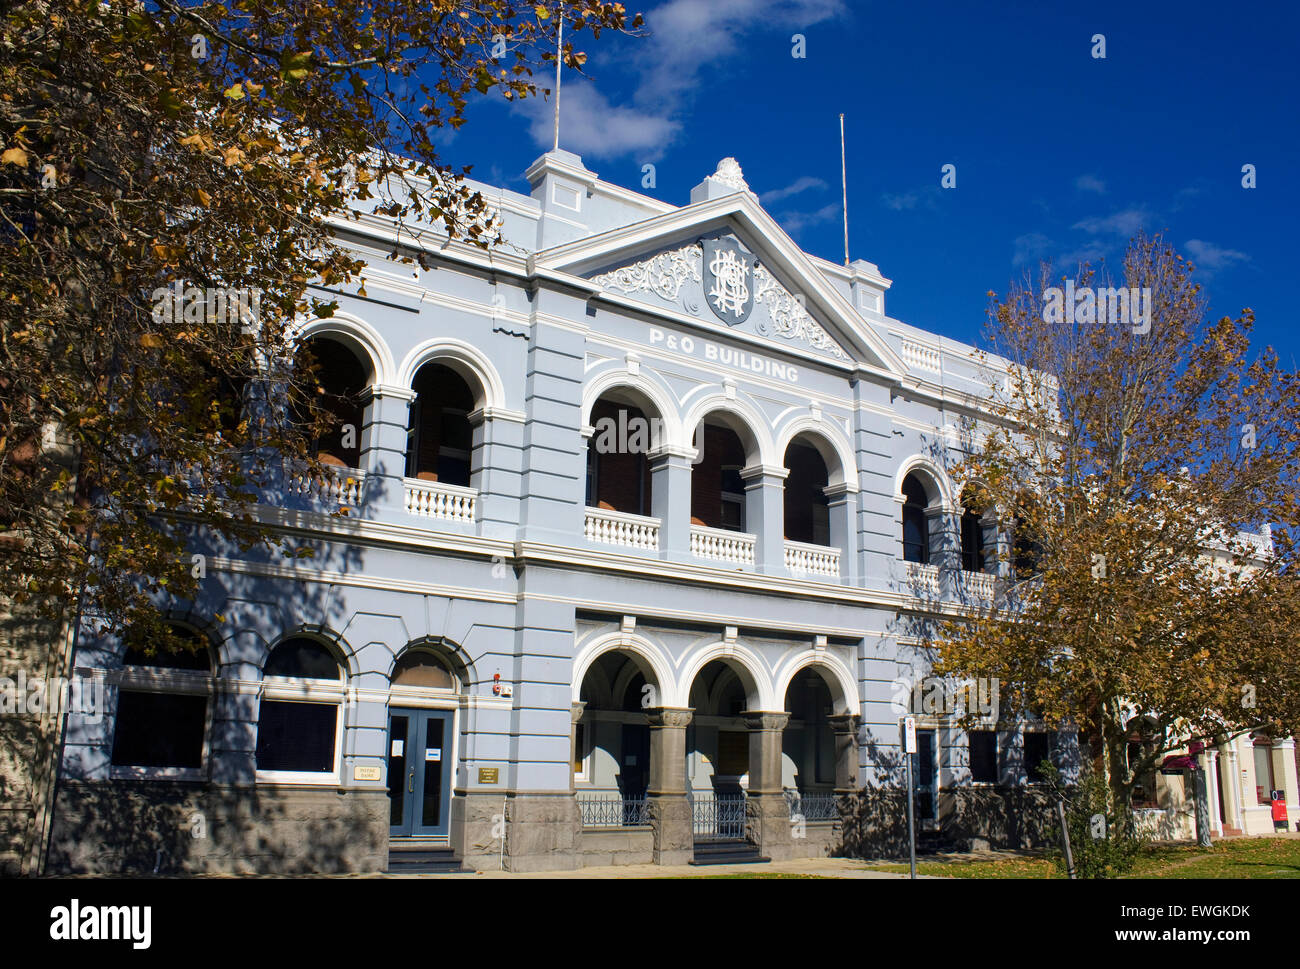 Post and Orient Building Fremantle Perth Western Australia Stock Photo